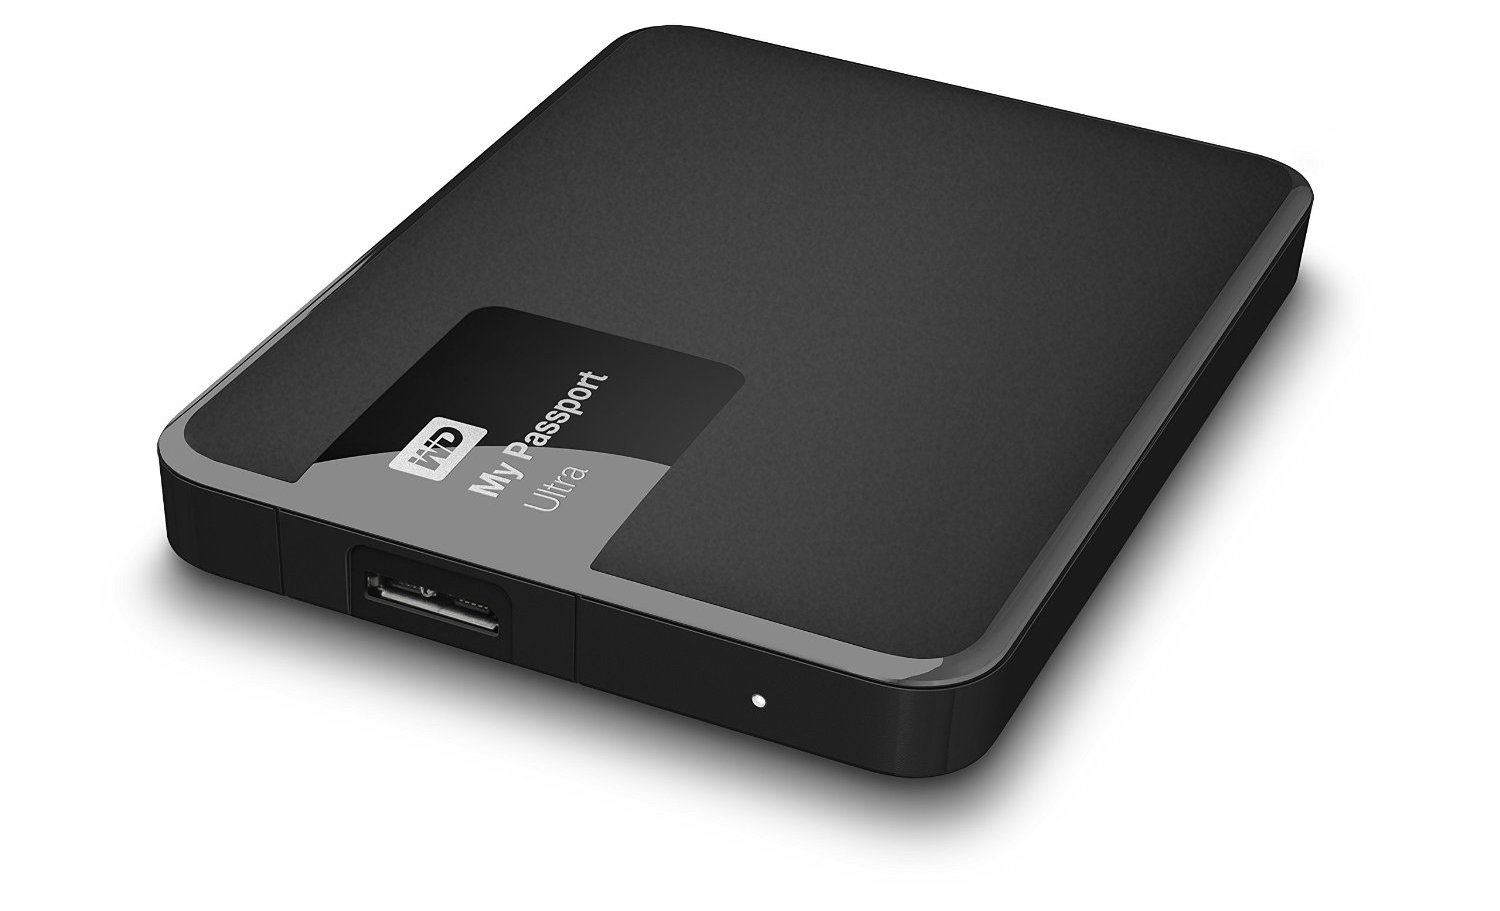 mac external hard drive for time machine and media streaming